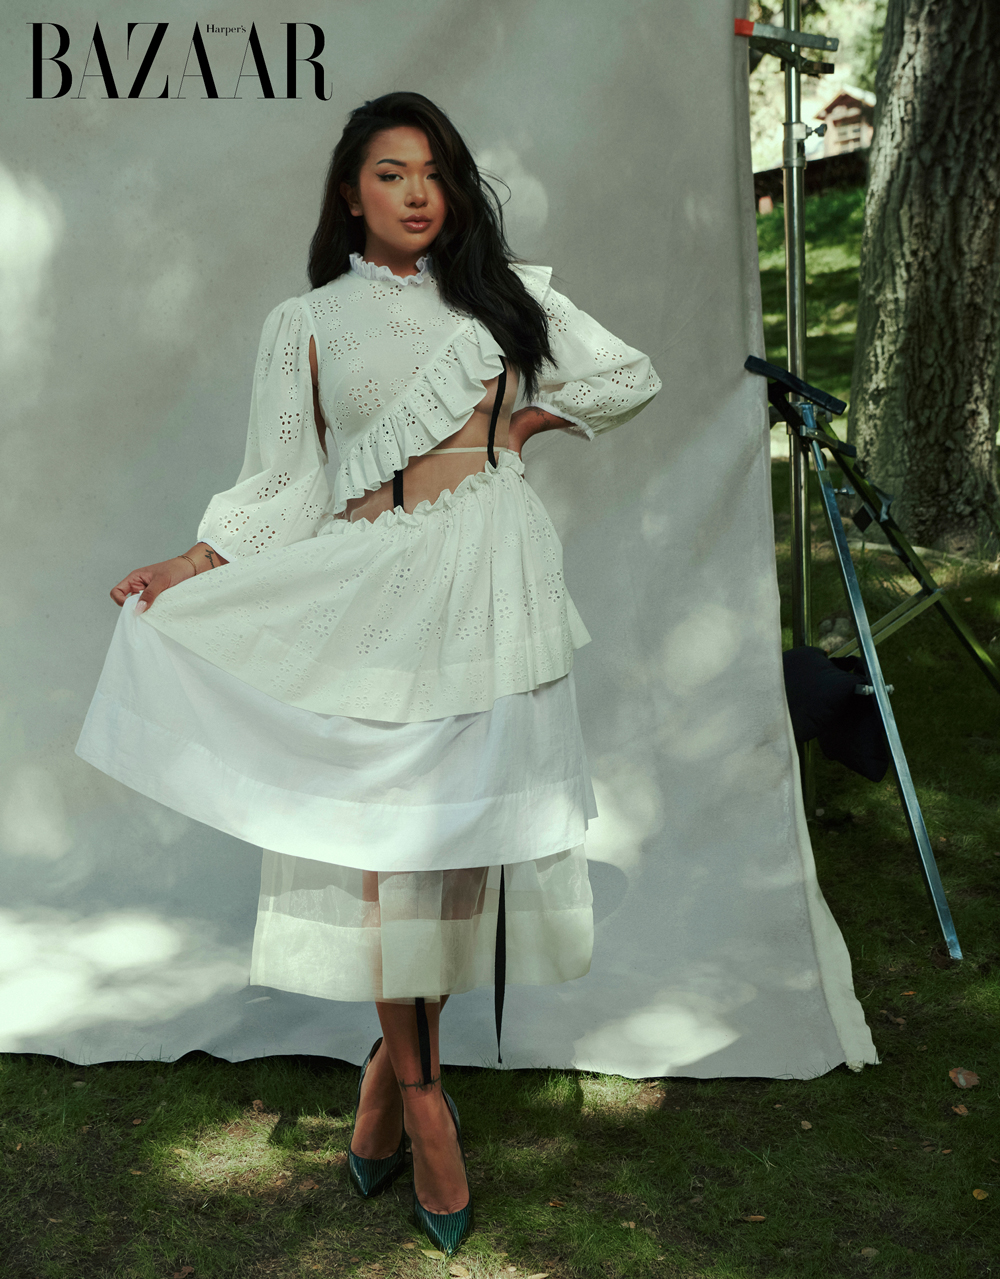 From Content creator to fashion mogul, Mai Pham reveals her roots